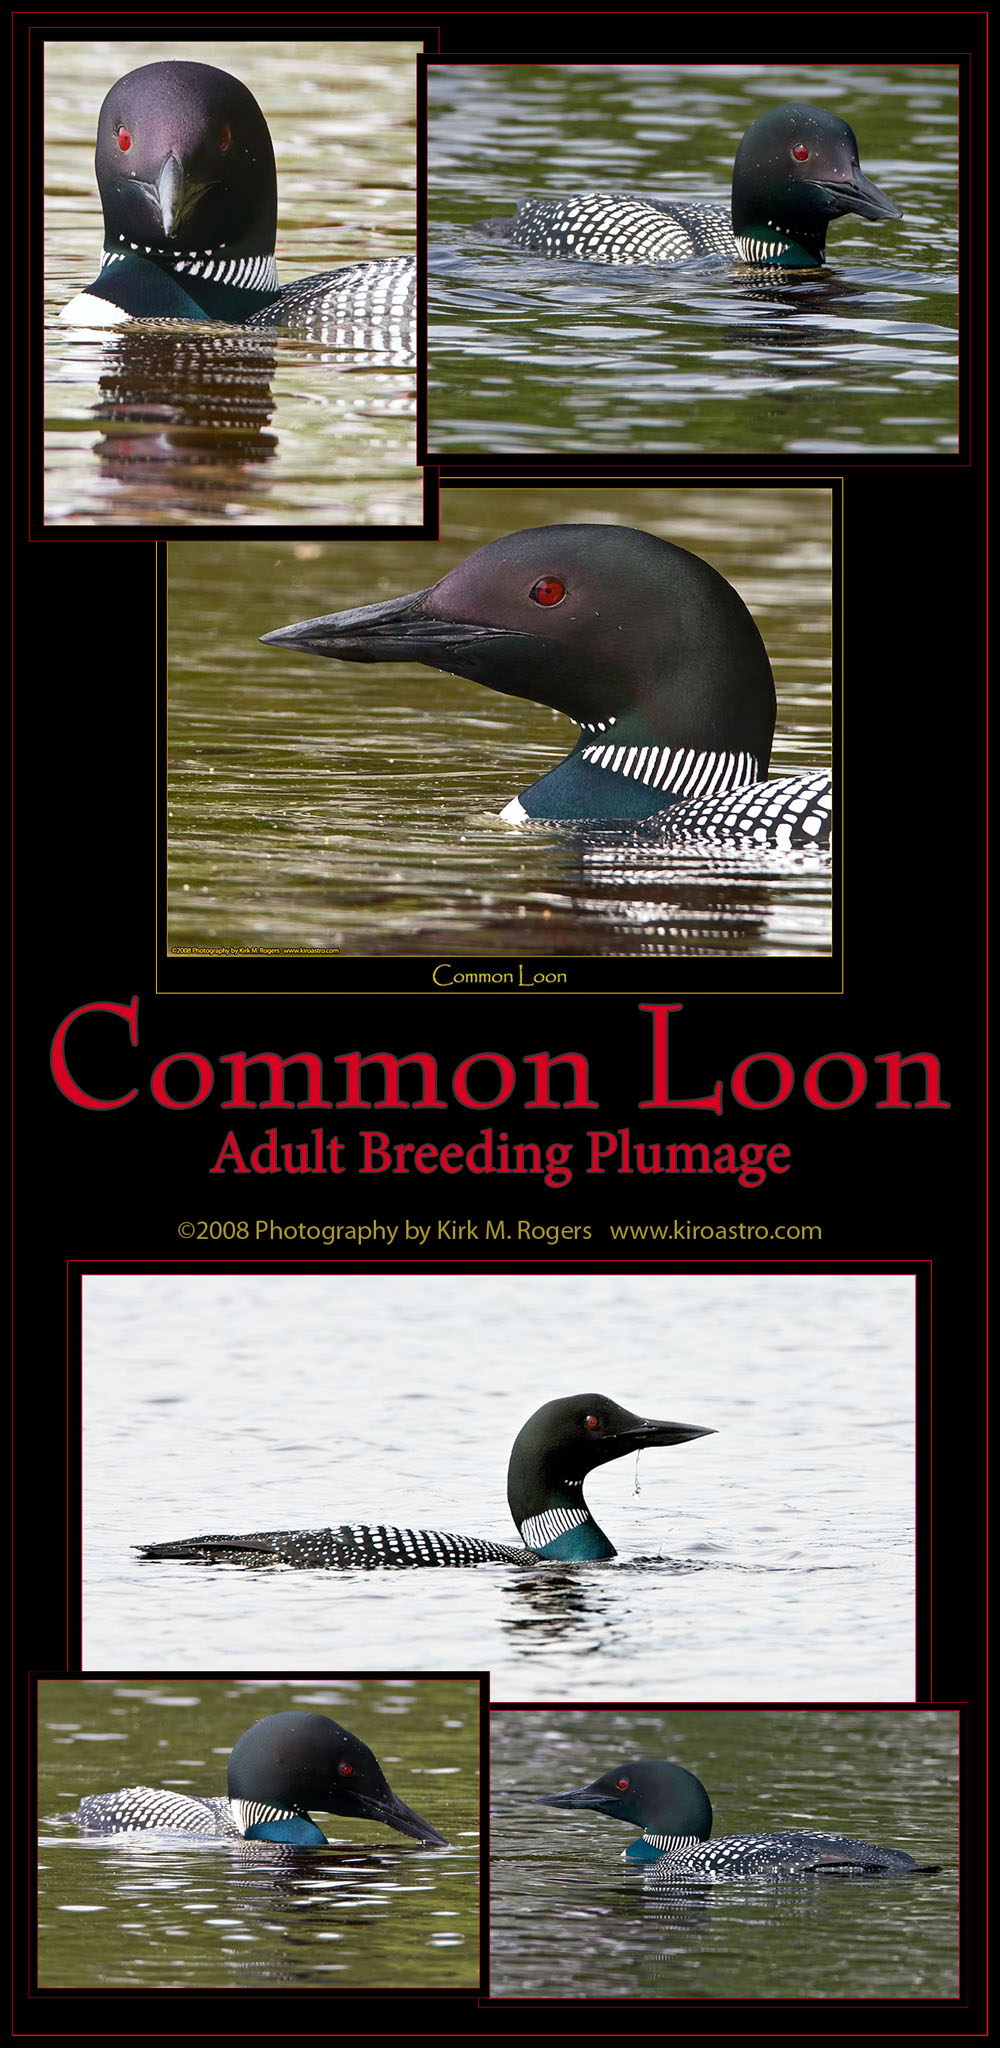 Common Loons in Breeding Plumage